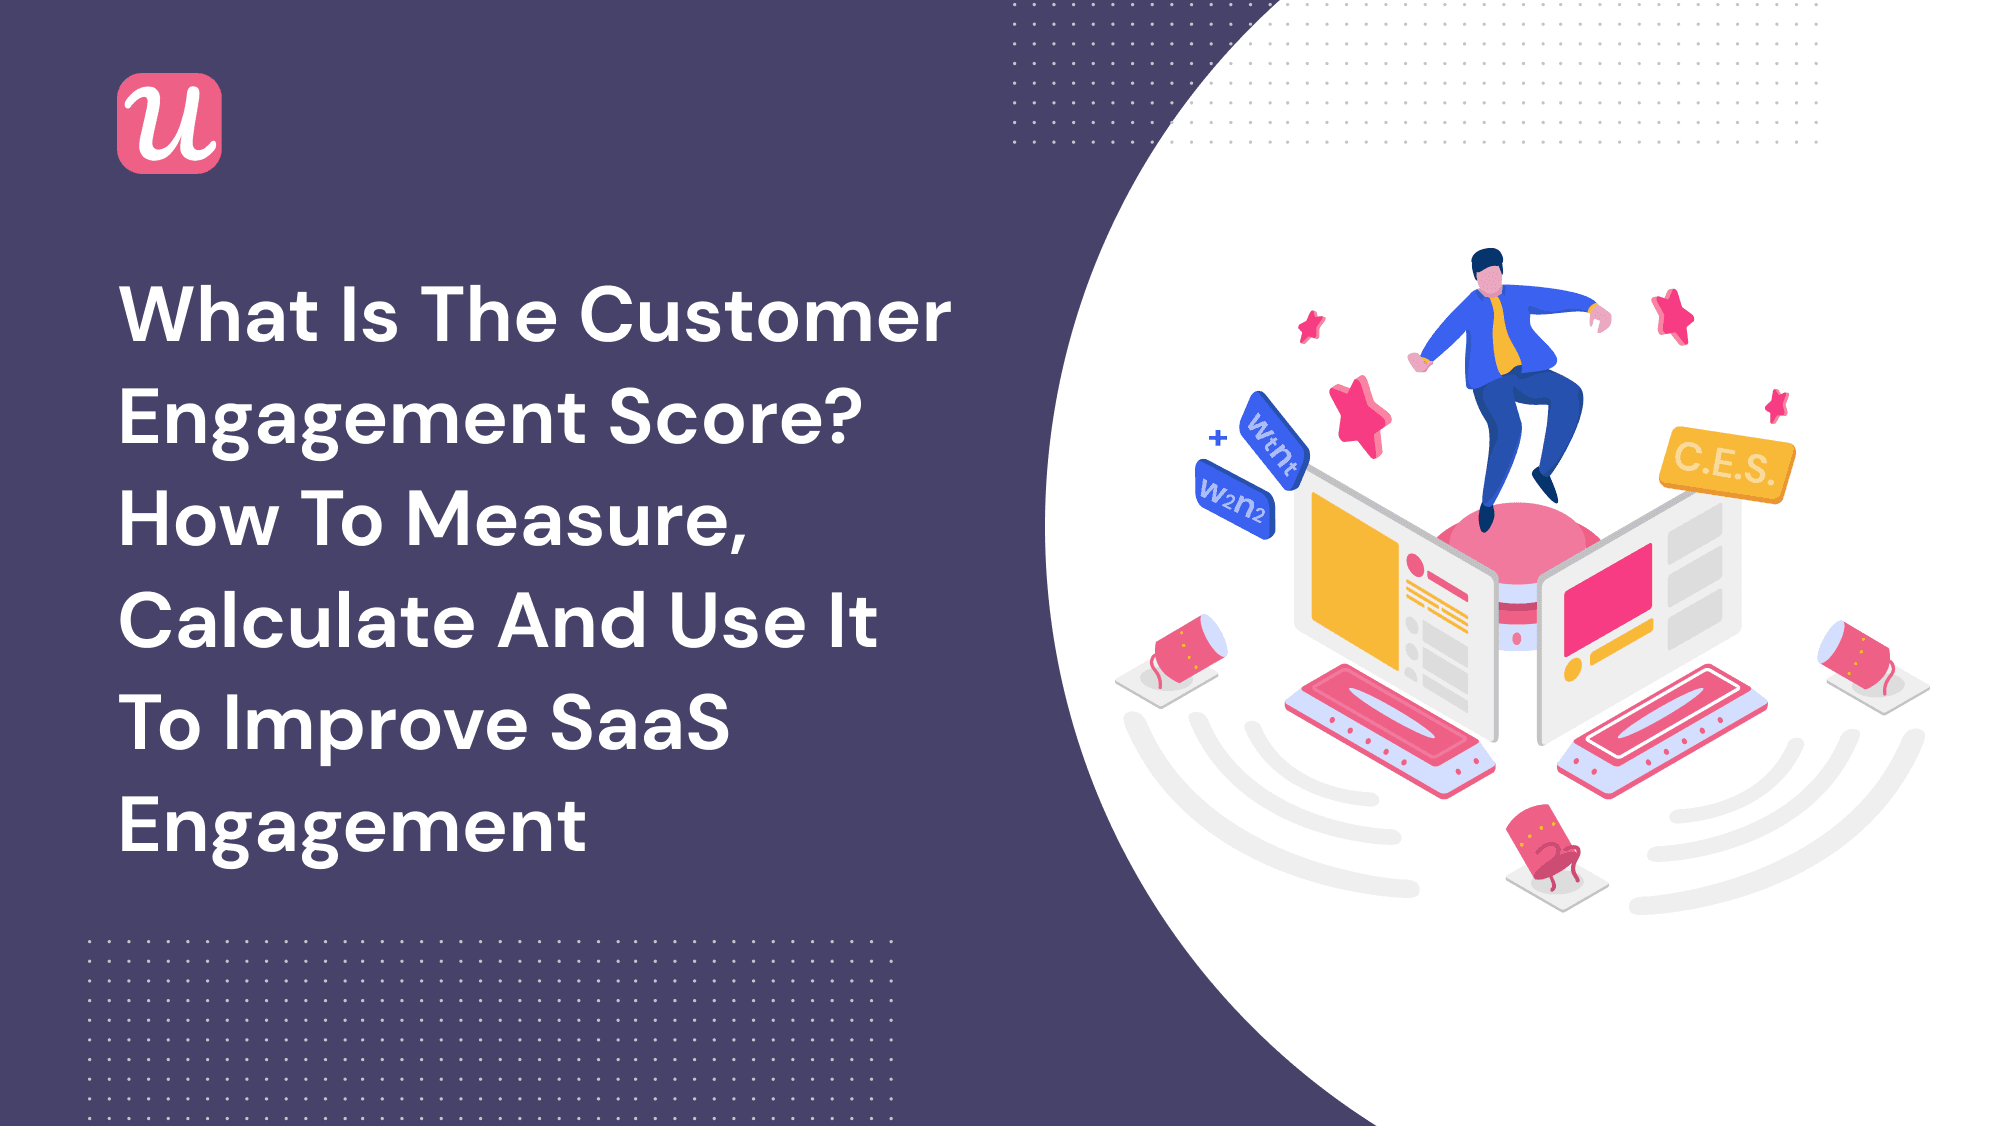 What Is The Customer Engagement Score? How To Measure, Calculate, and Use It To Improve SaaS Engagement